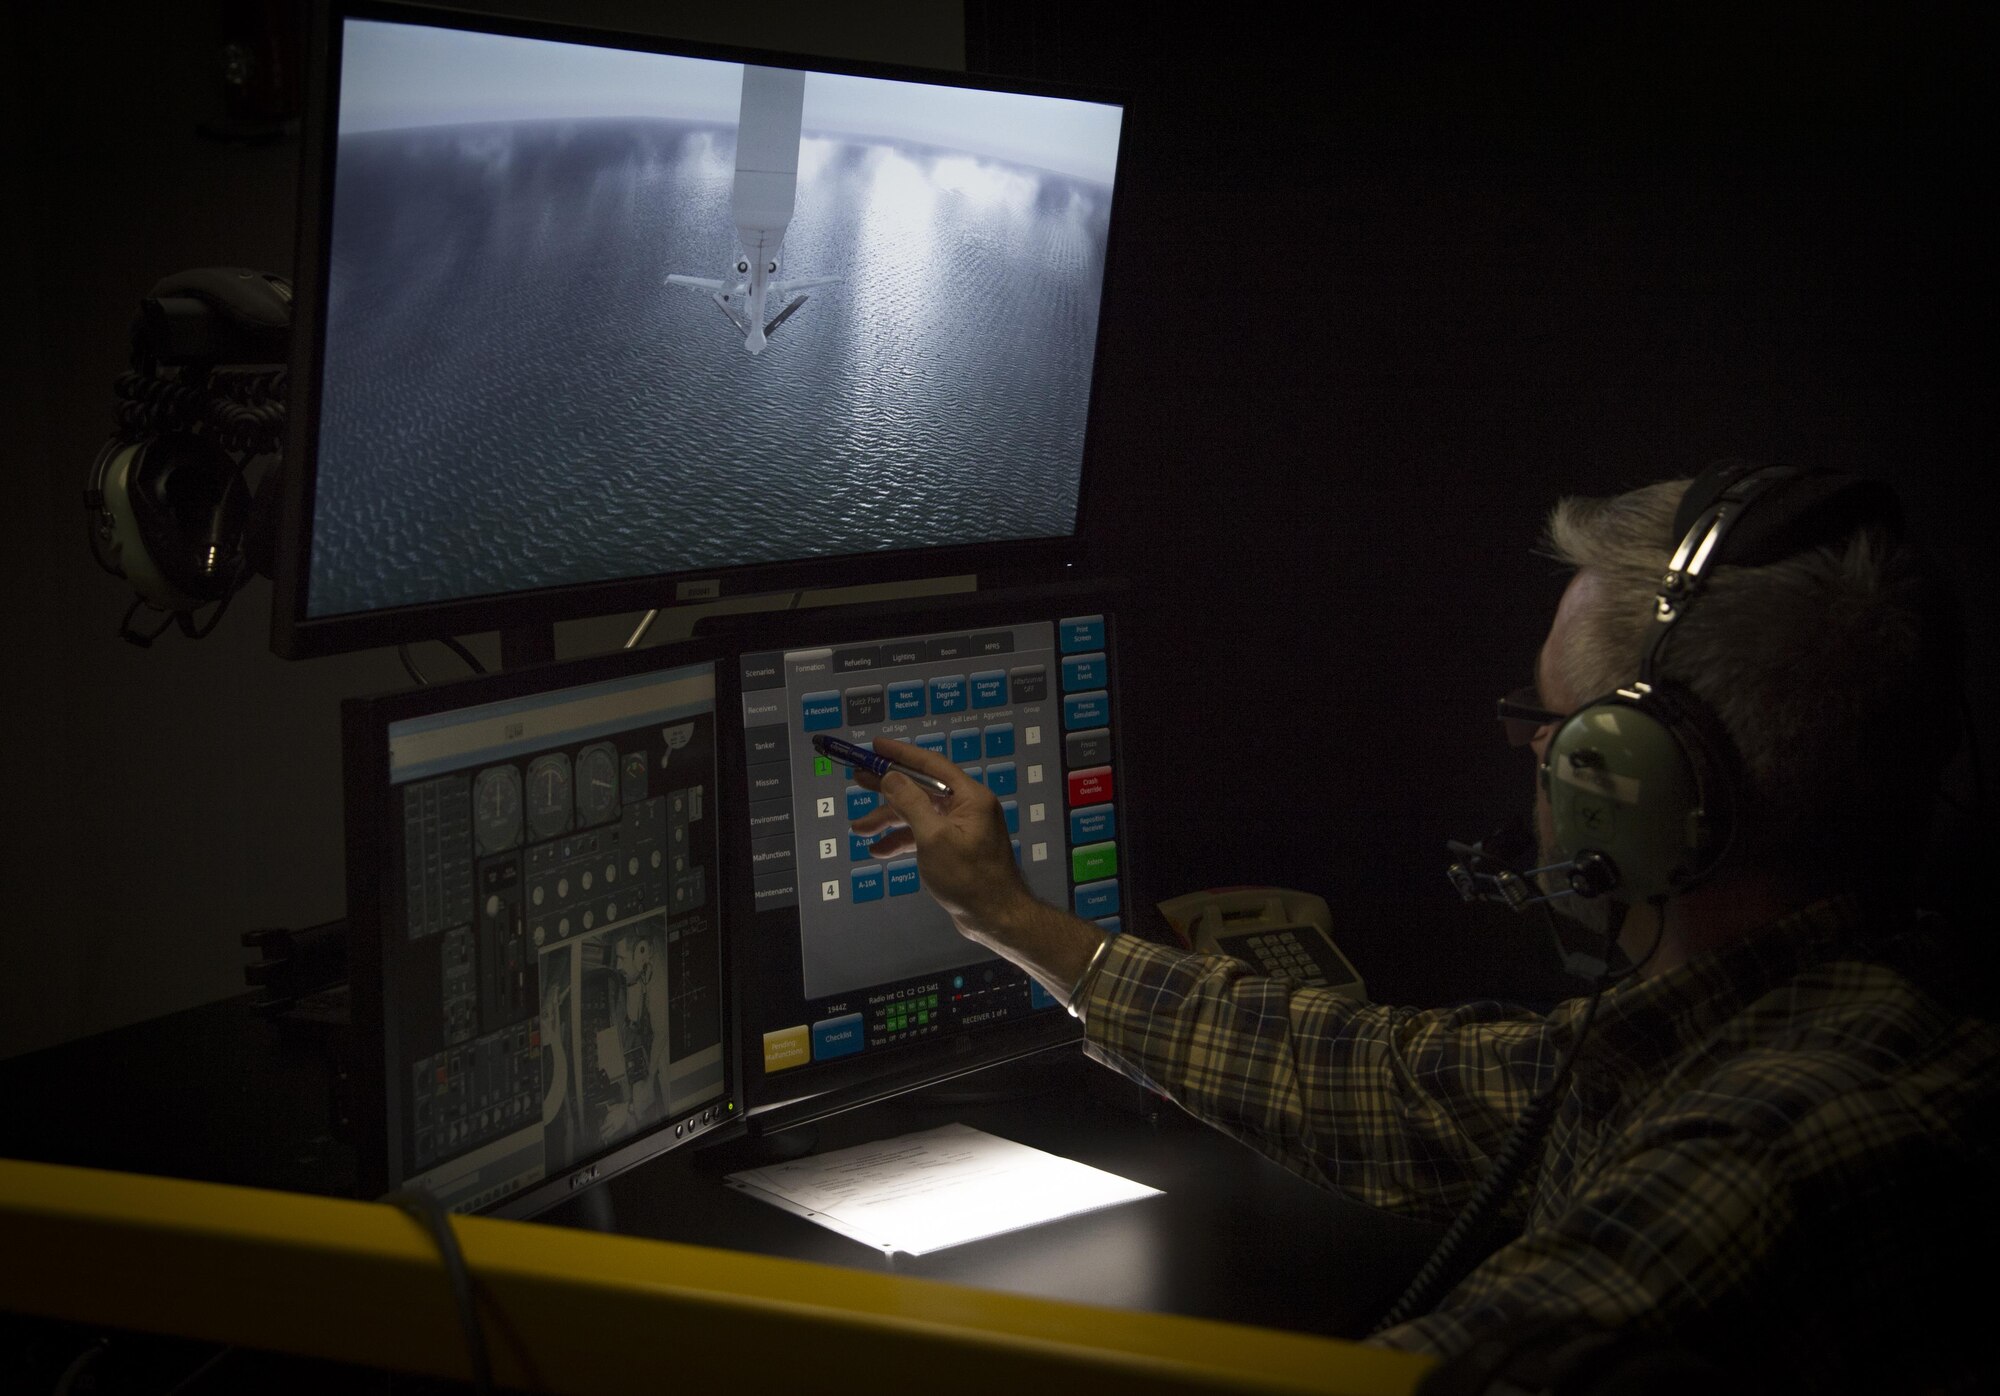 John Mercer, a Boom Operator Weapon System Trainer (BOWST) Instructor assigned to the 6th Operations Support Squadron, operates the instructor portion of the BOWST, Nov. 8, 2017, at MacDill Air Force Base, Fla. The simulator educates Airmen at all levels to be better equipped to deal with unusual circumstances during aerial refueling. (U.S. Air Force photo by Senior Airman Mariette Adams)